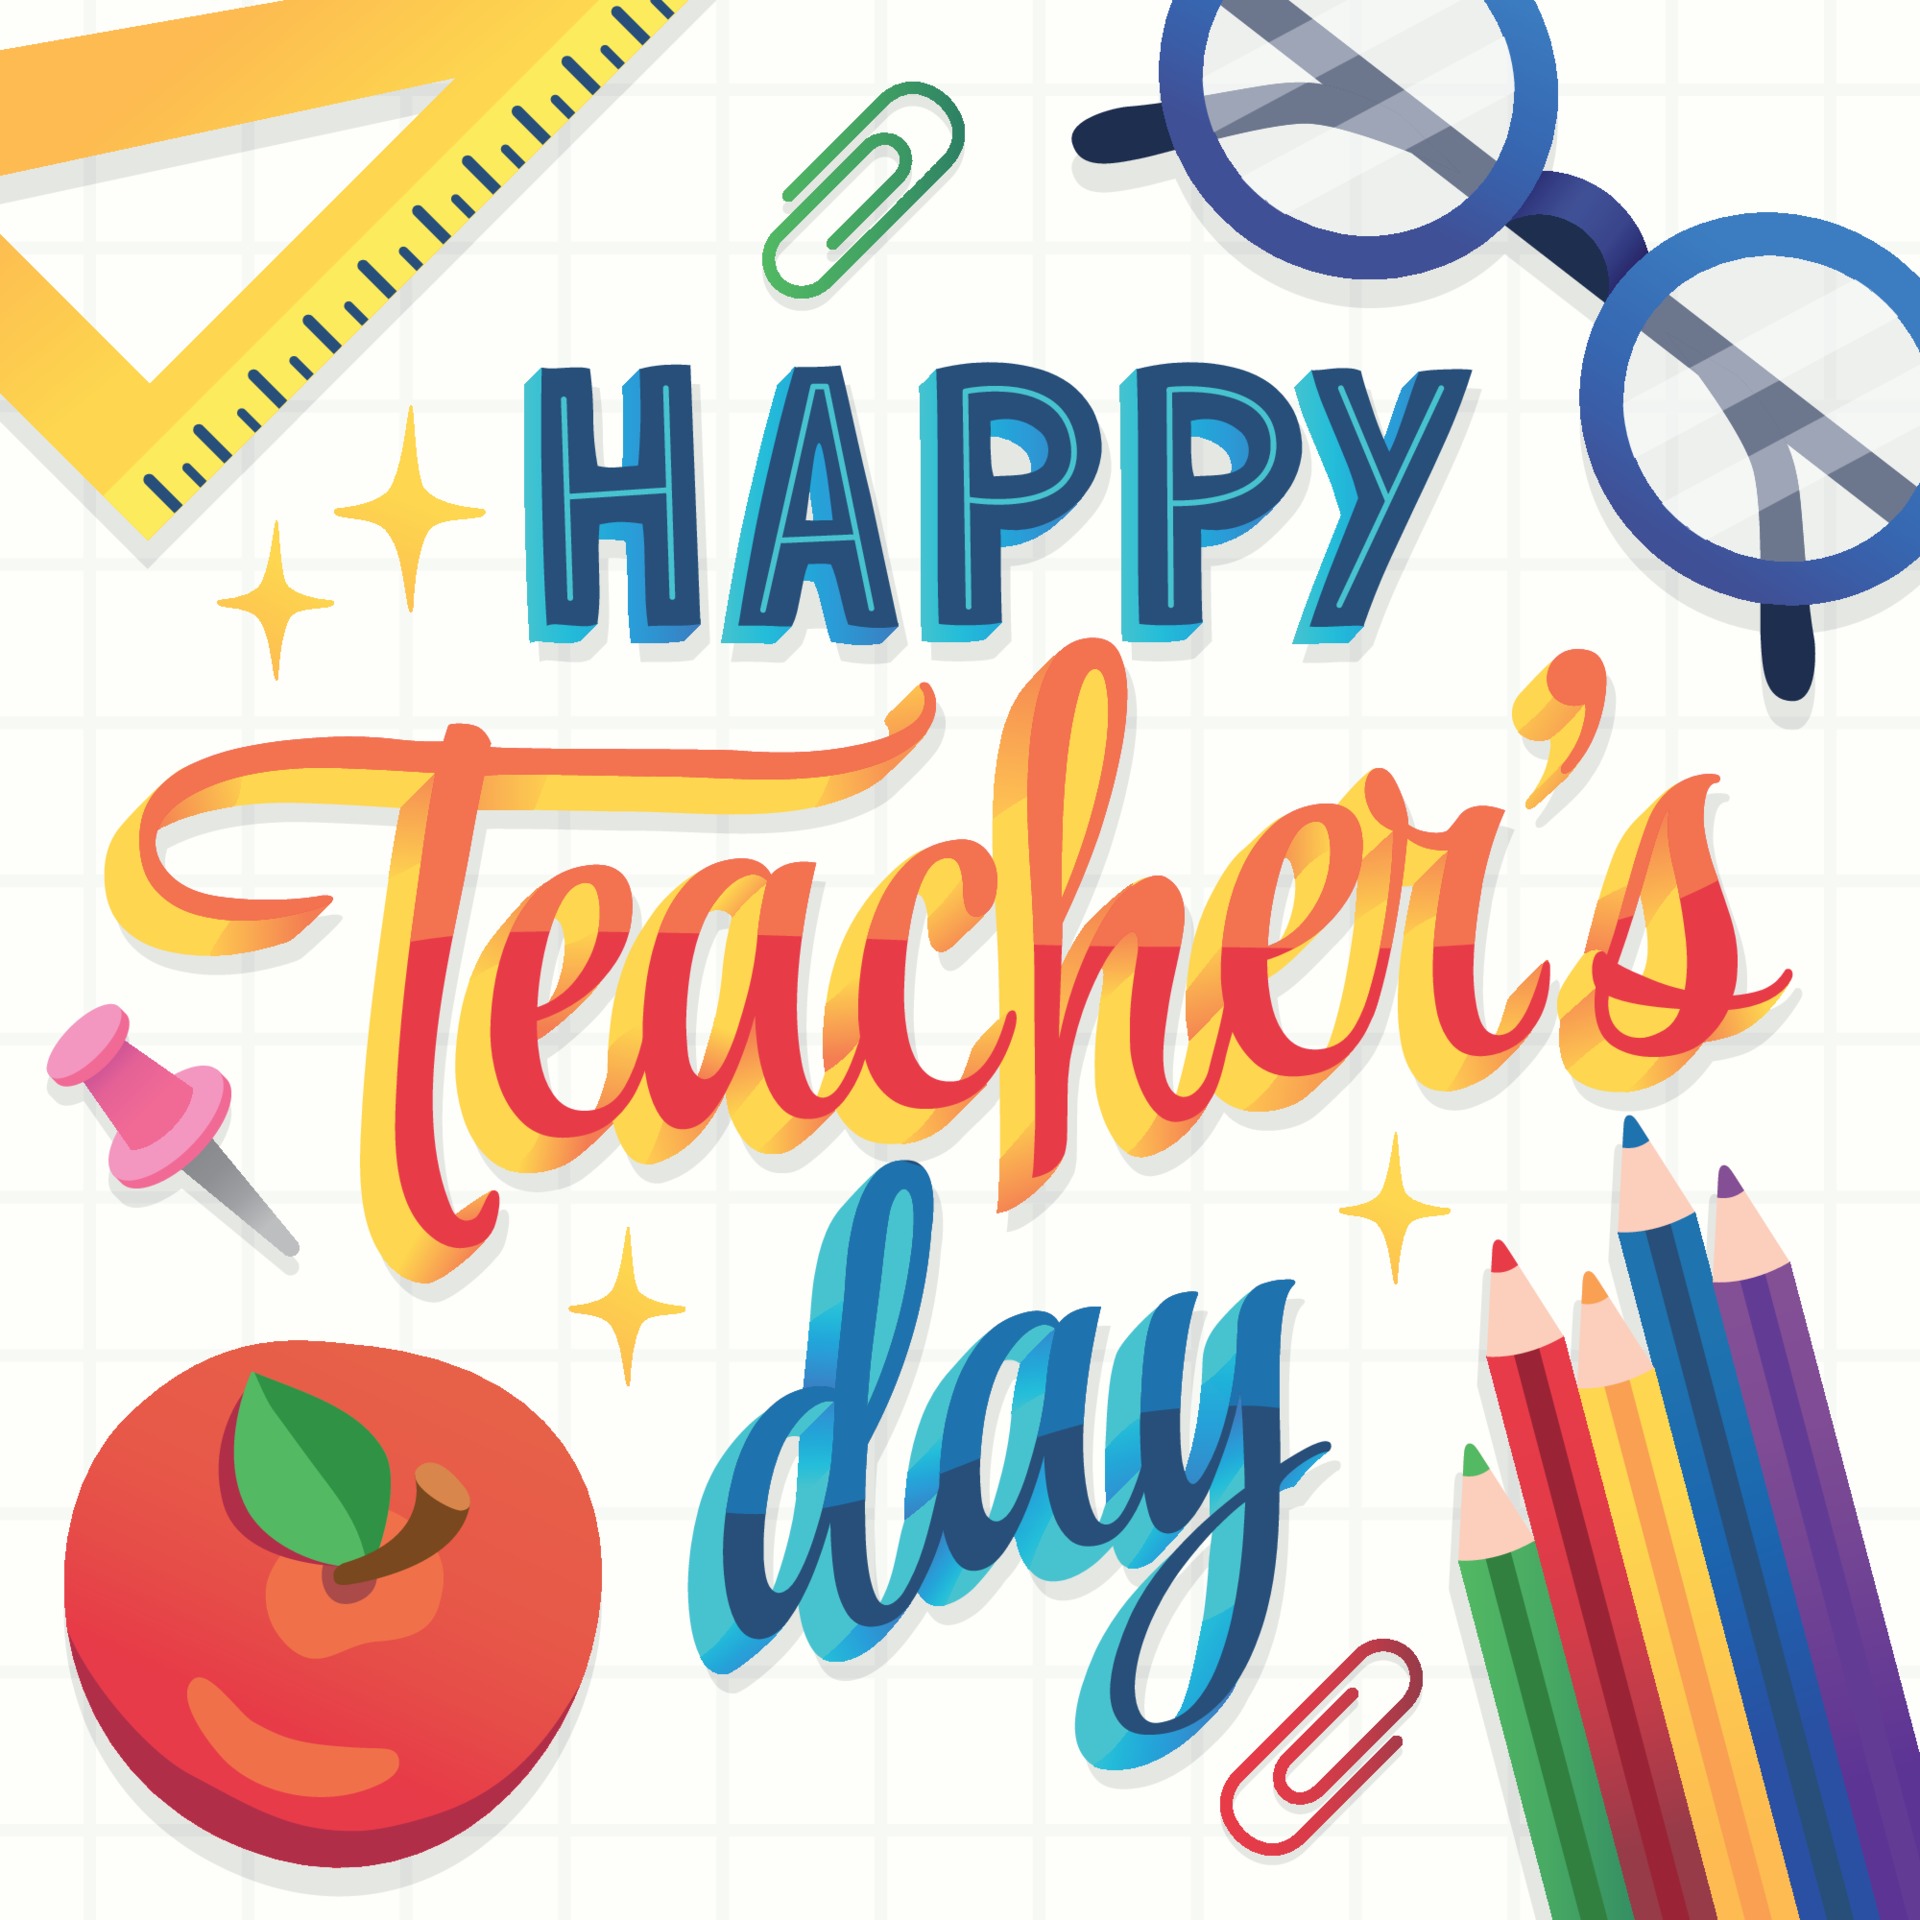 Teachers Day Card Vector Art, Icons, and Graphics for Free Download